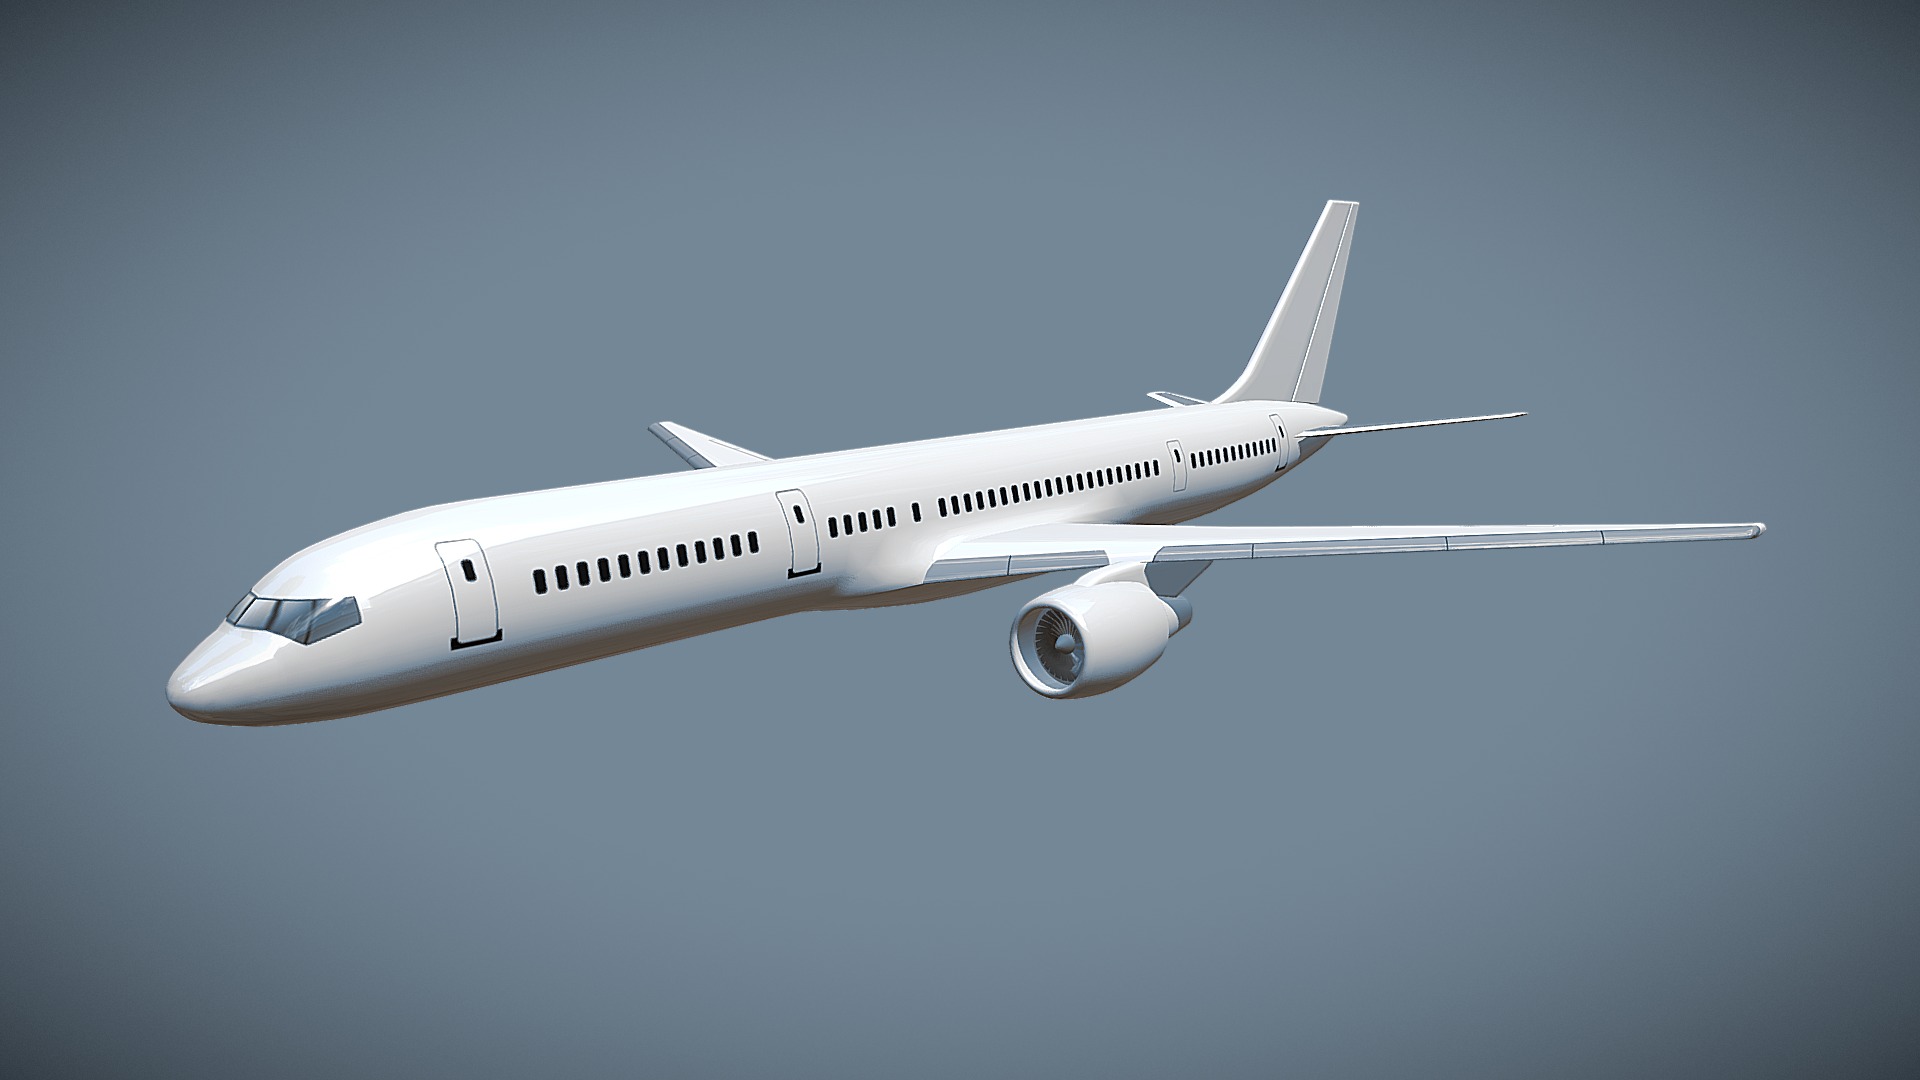 3D model Boeing 757-200 jetliner - This is a 3D model of the Boeing 757-200 jetliner. The 3D model is about a white airplane flying in the sky.